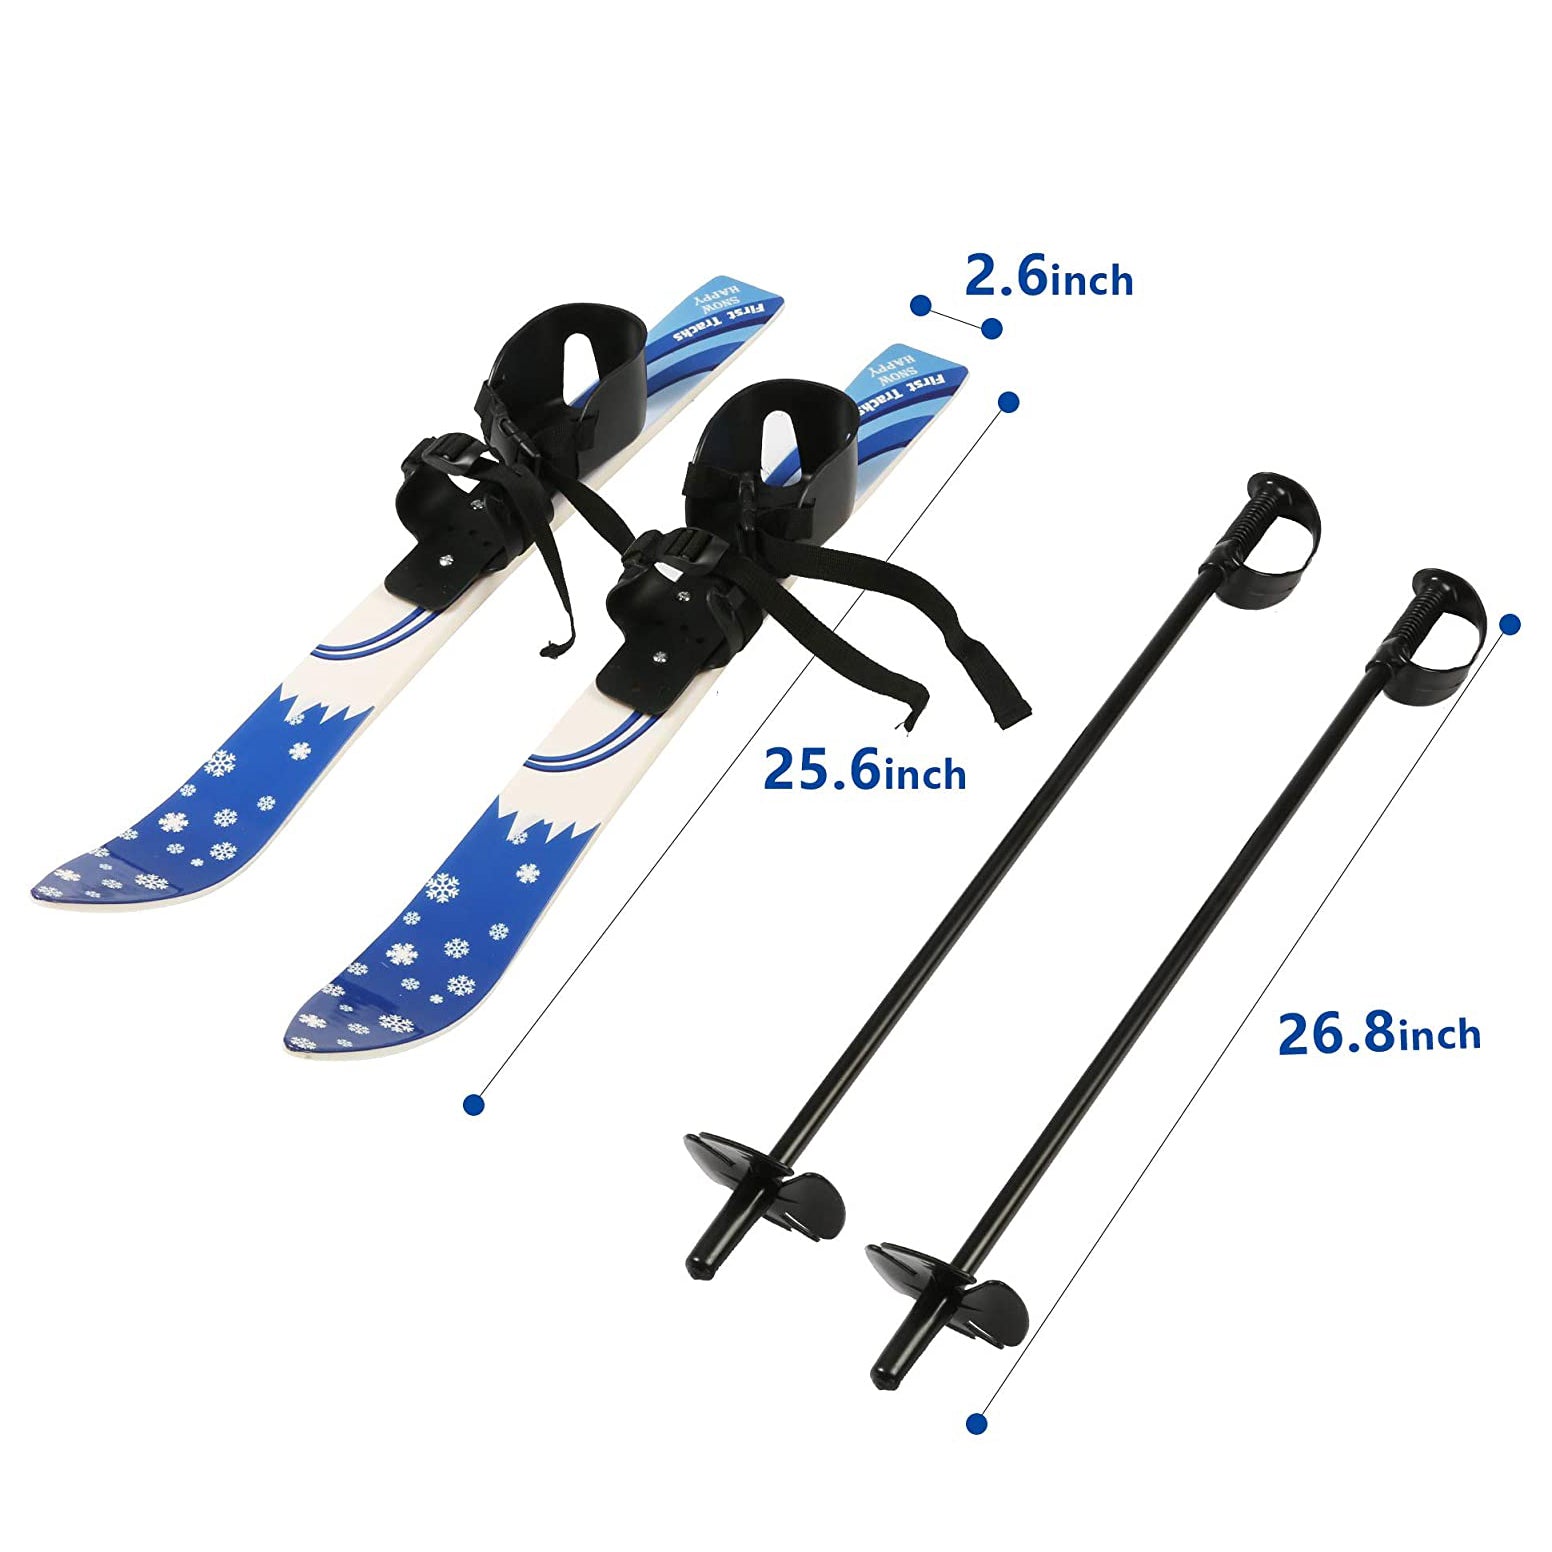 Kids Skis and Poles with Bindings for Age 2-4 Beginner Snow Skis 69cm, Blue